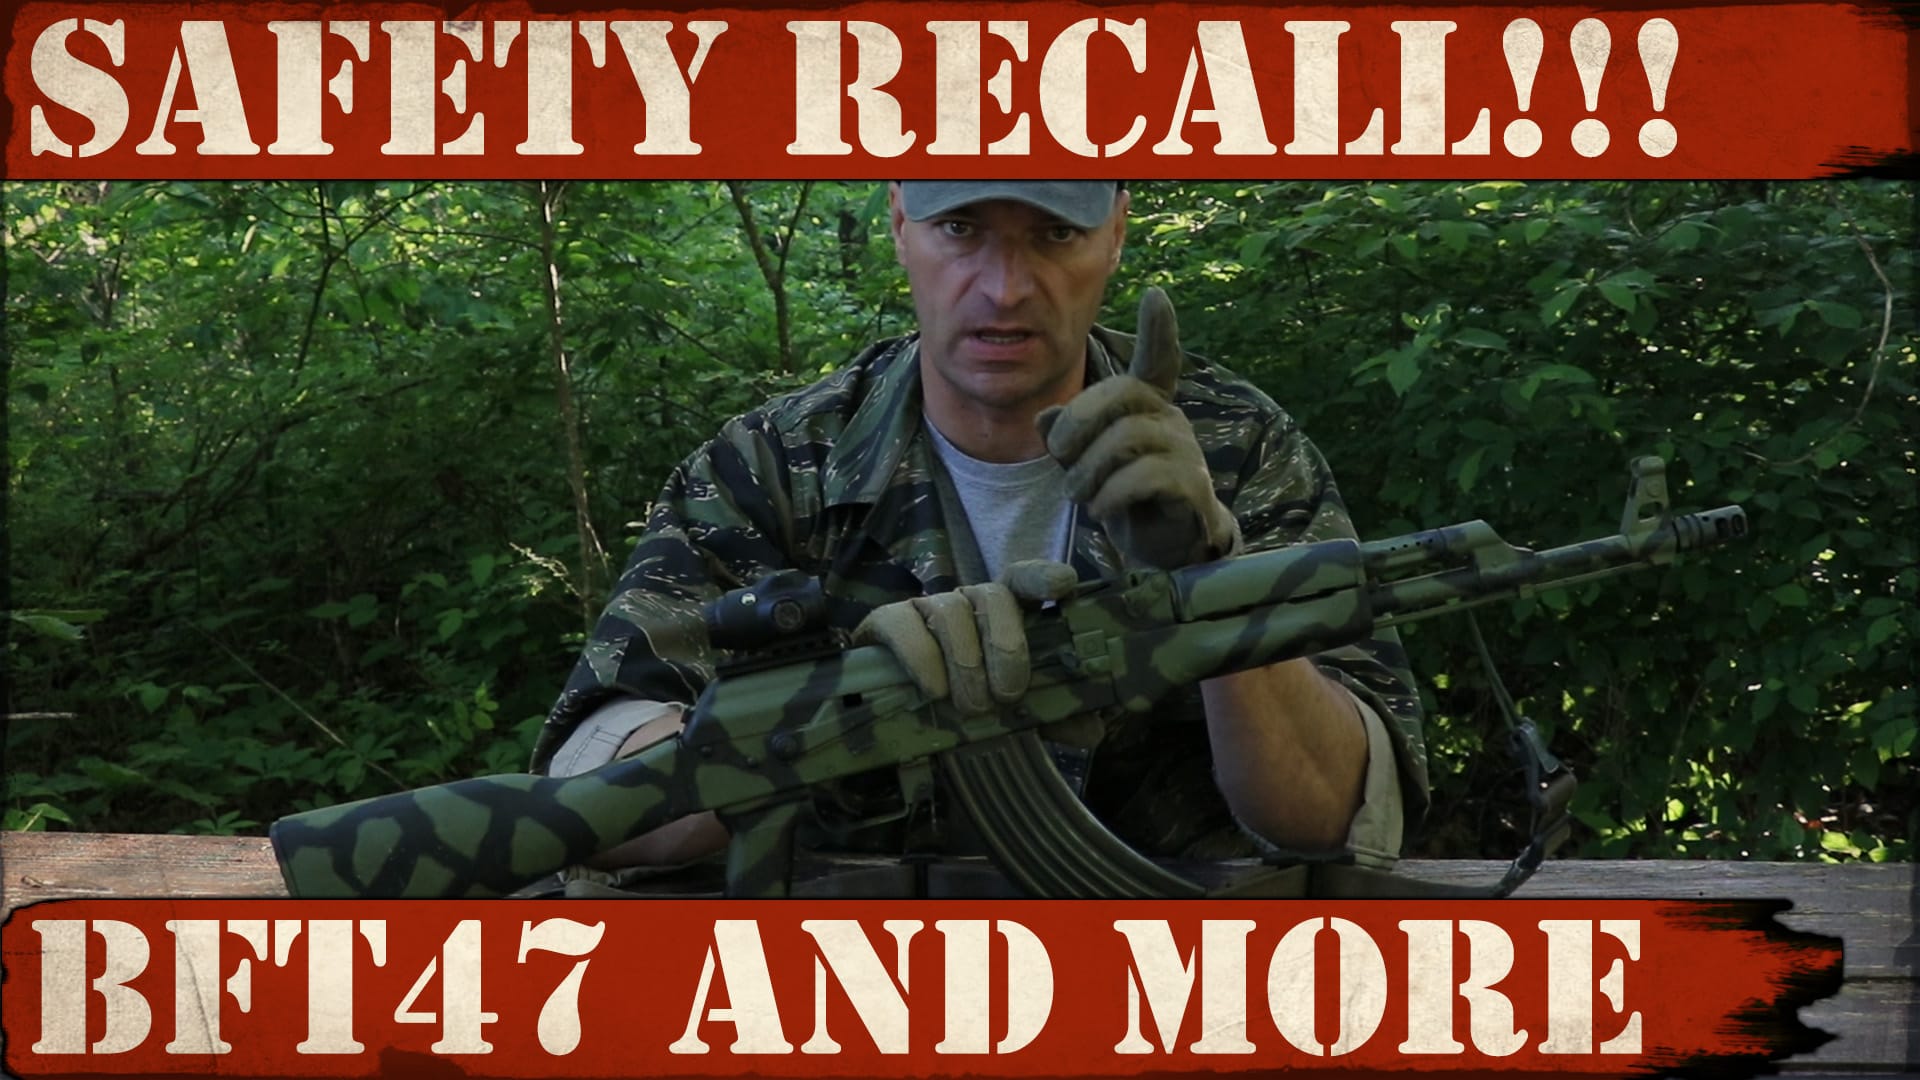 SAFETY RECALL!!! BFT47, DON’T GET SPAMMED and MORE!